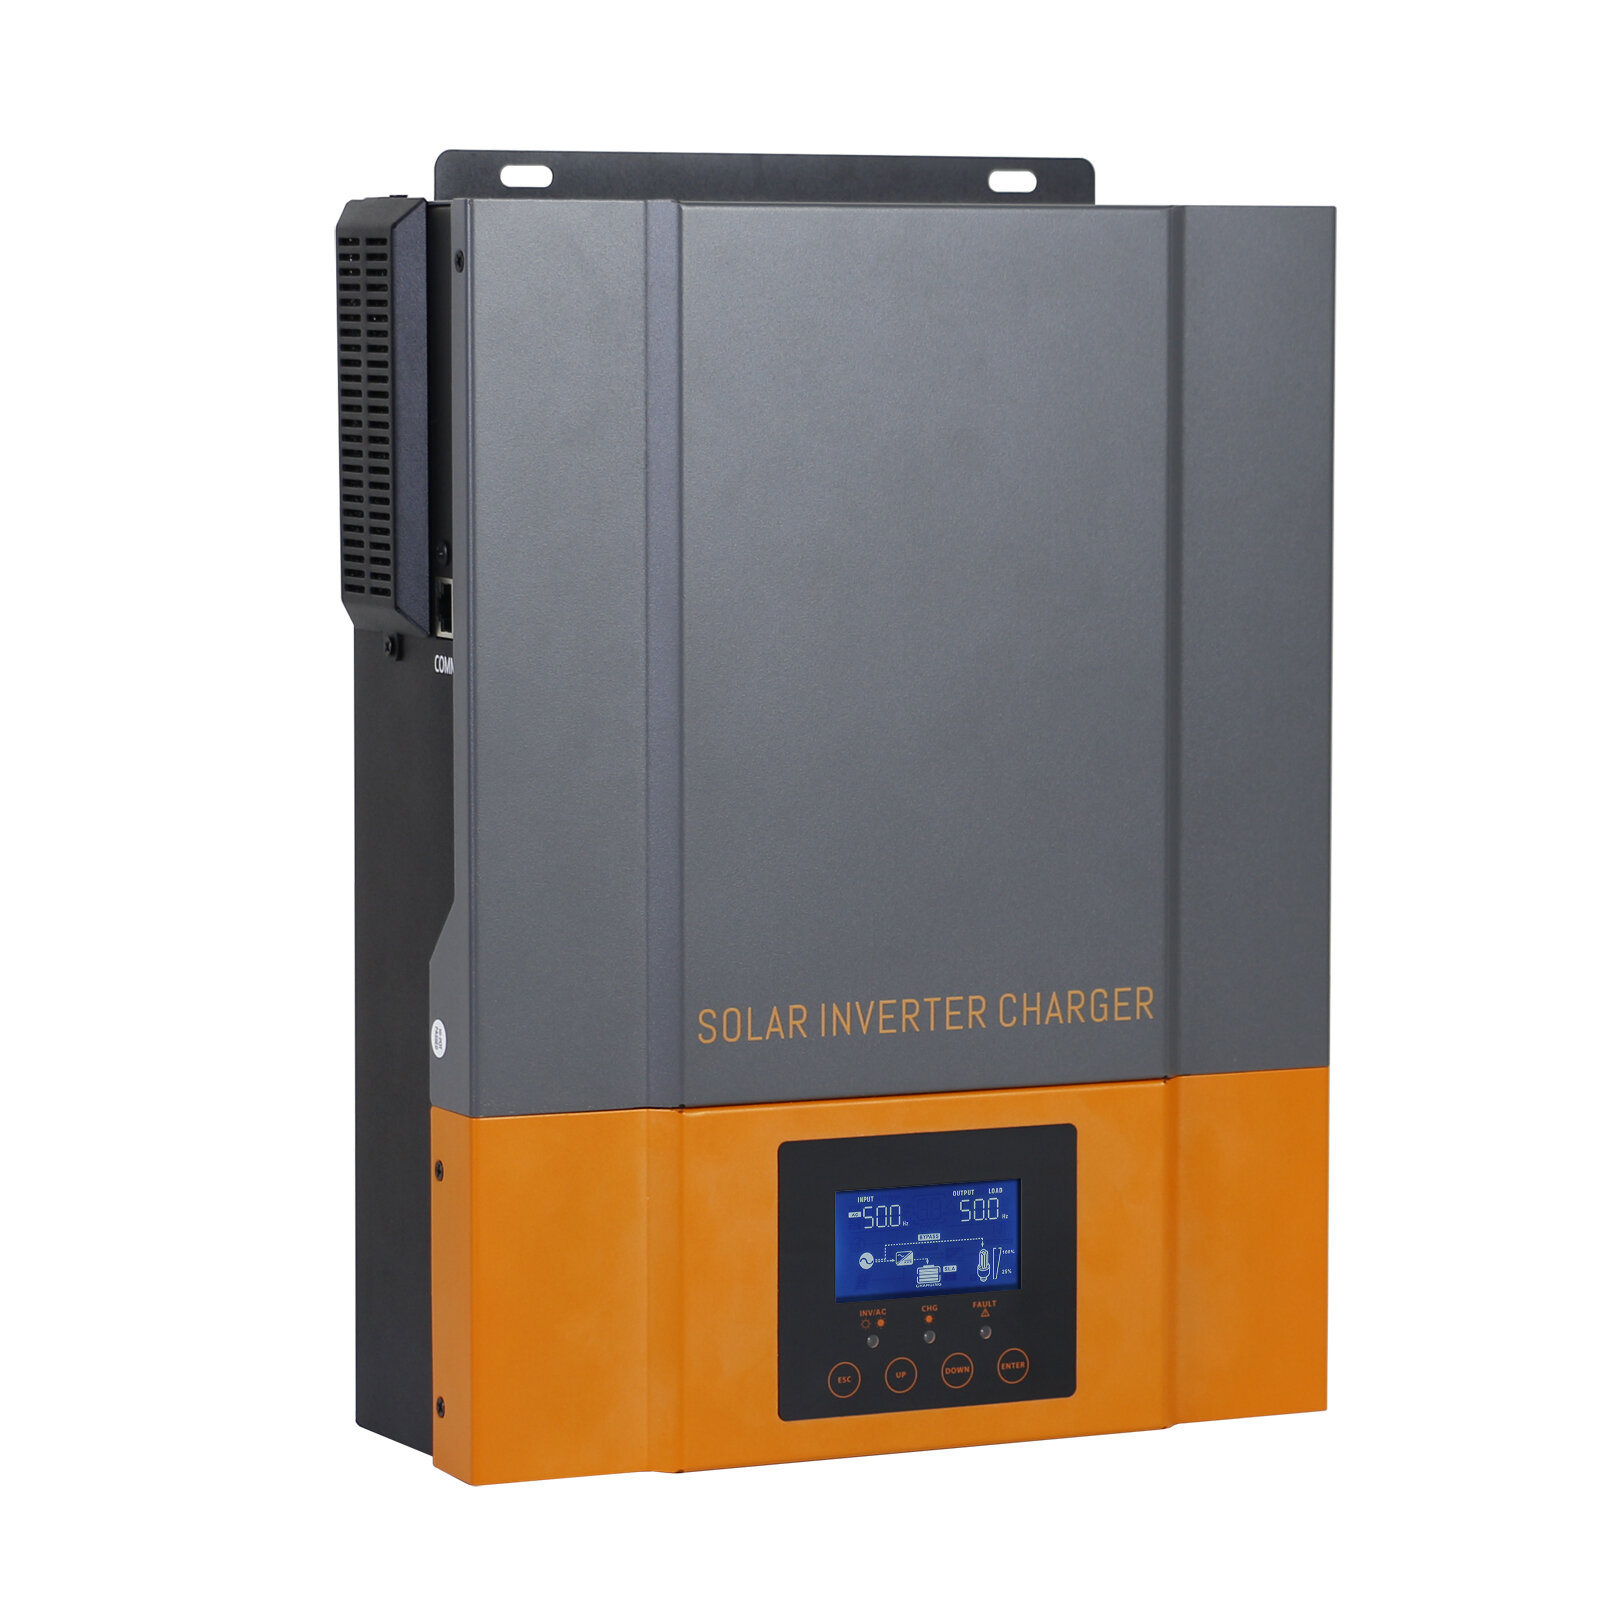 Image of PowMr 3KVA/2400W Hybr1d Solar Inversor 24V Battery Charger Built-in MPPT 80A Solar Charger 230VAC Output PV Max 450VDC I